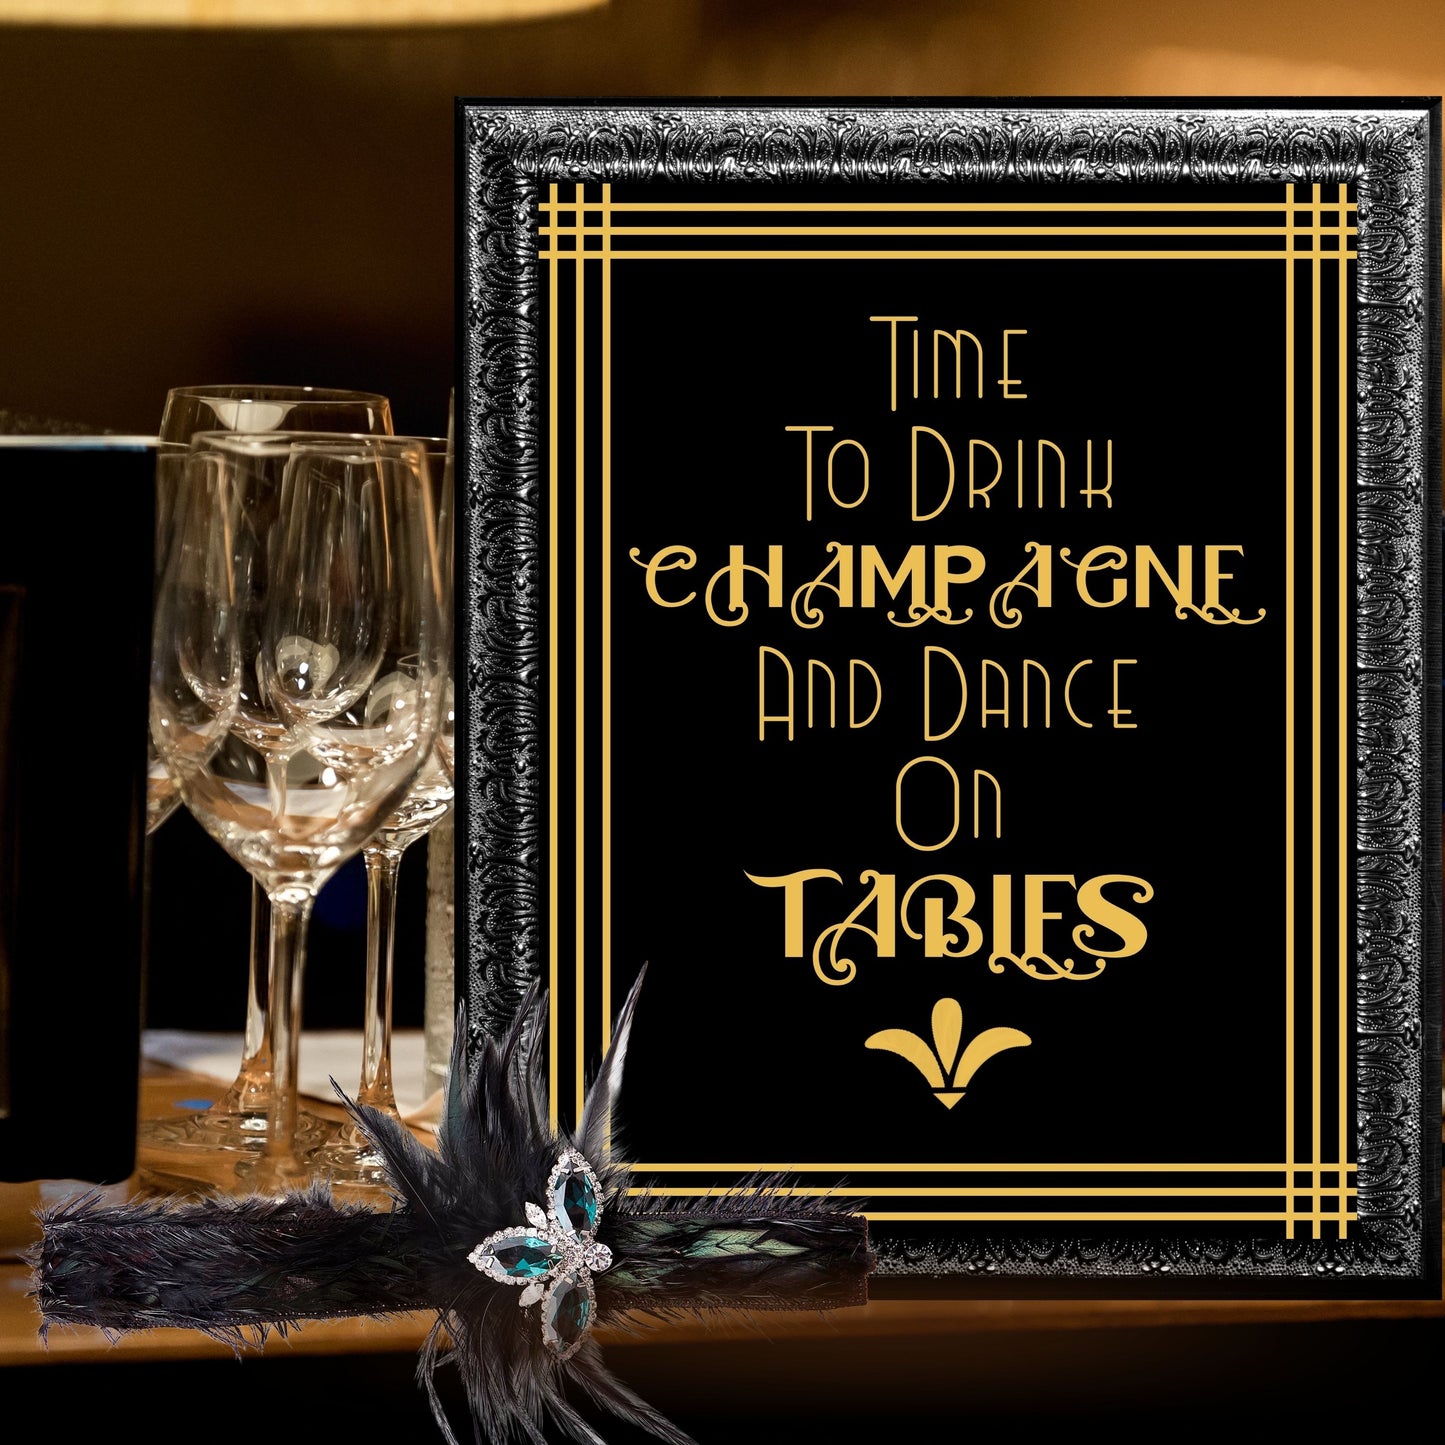 Set Of 6 Printable Party Signs For Great Gatsby Or Roaring 20's Party Or Wedding, Black & Gold, Champagne Themed Printable Party Decor